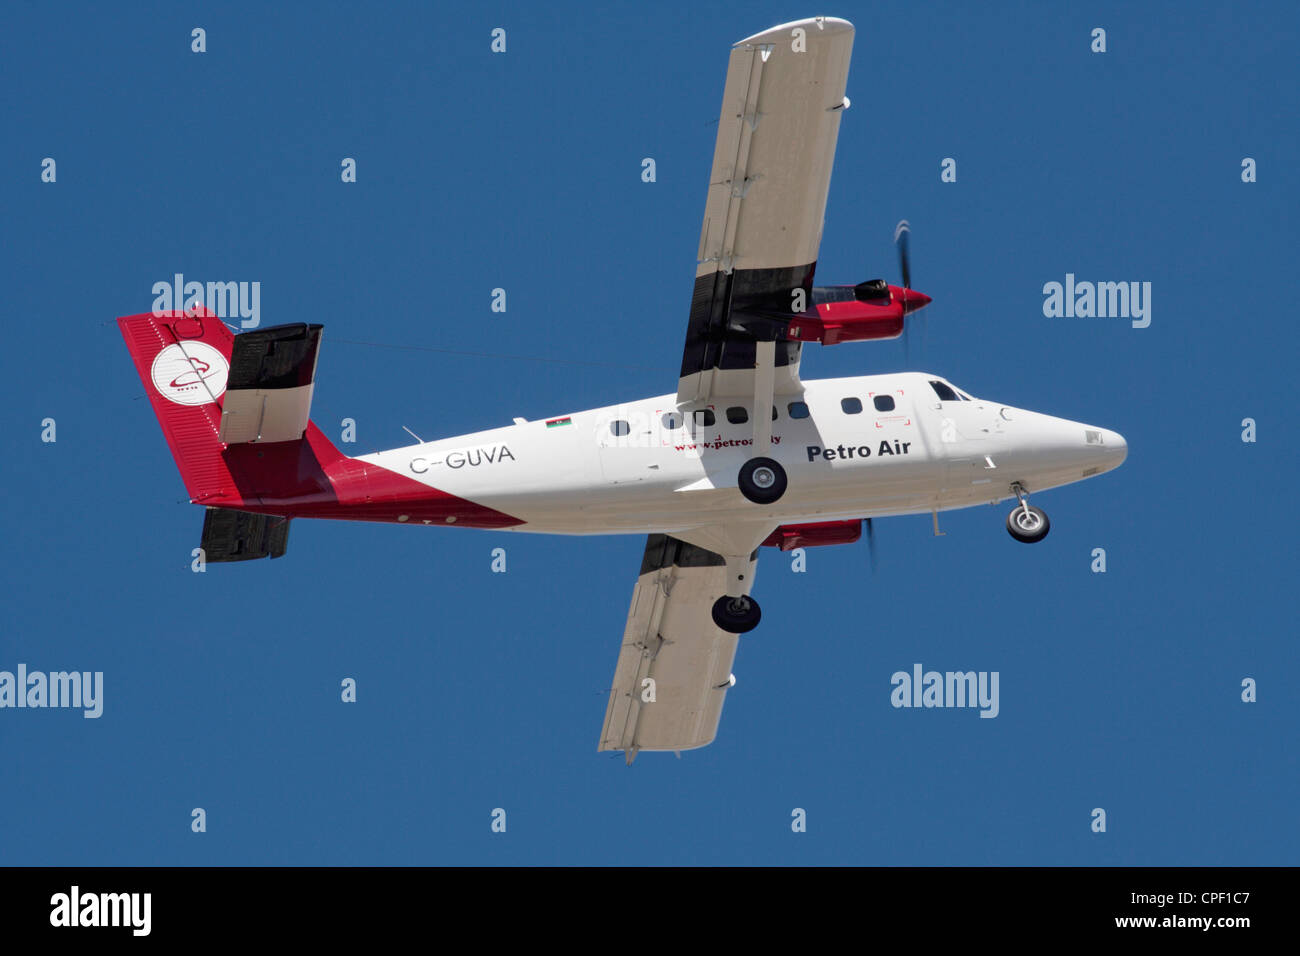 DHC-6-400 Twin Otter light utility aeroplane on delivery to Petro Air of Libya Stock Photo